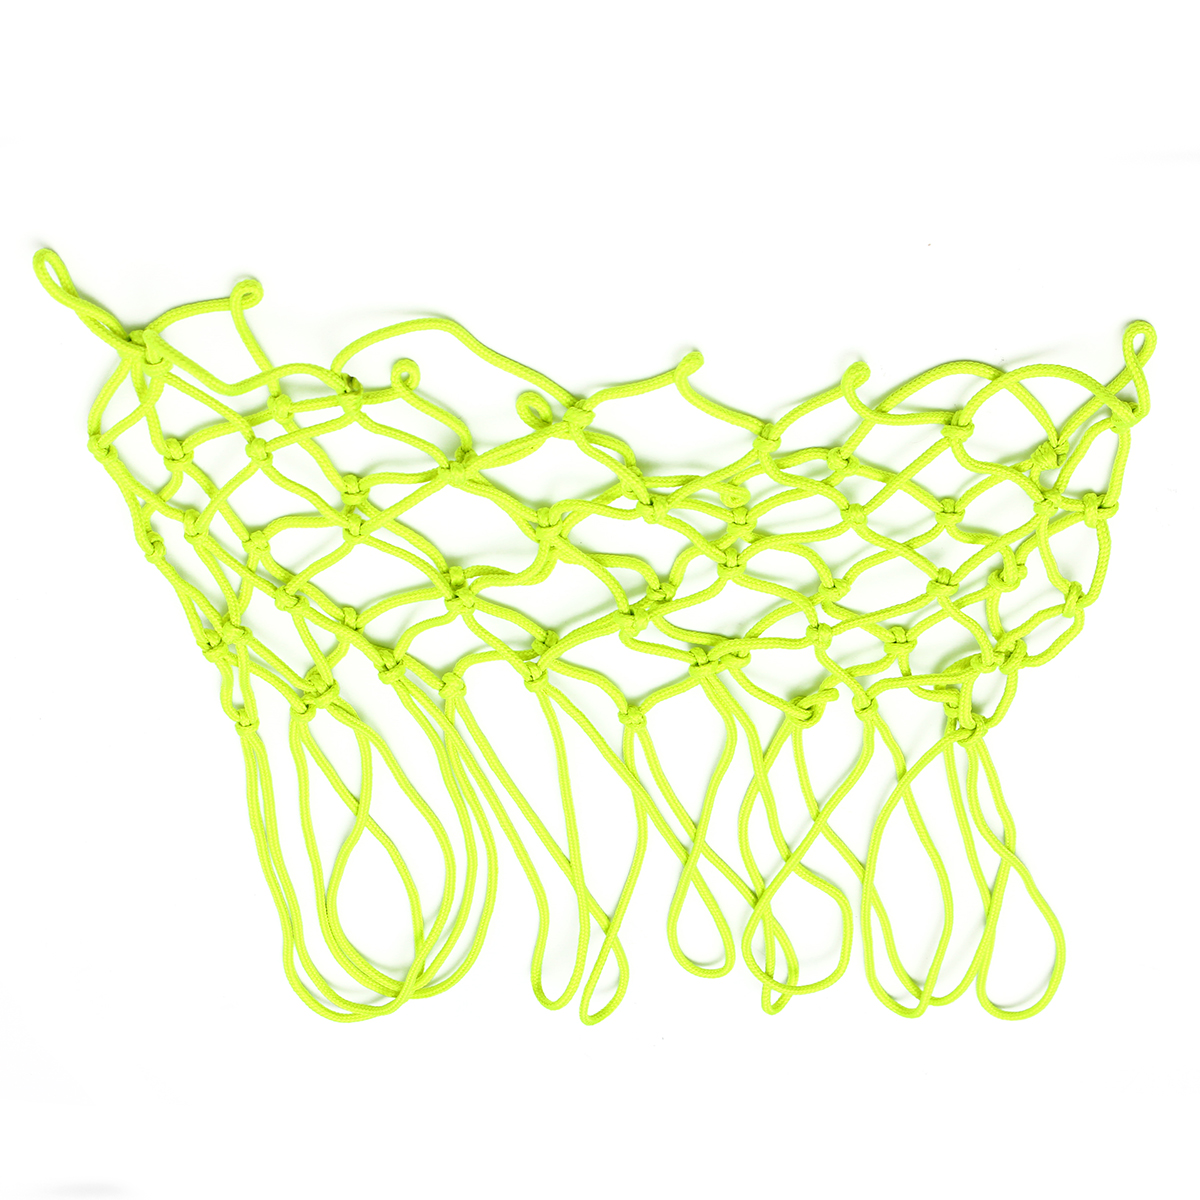 44x32cm-Glow-In-The-Dark-Basketball-Net-Nylon-Abrasion-Resistant-Easy-to-Install-Outdoor-Indoor-Bask-1884146-7